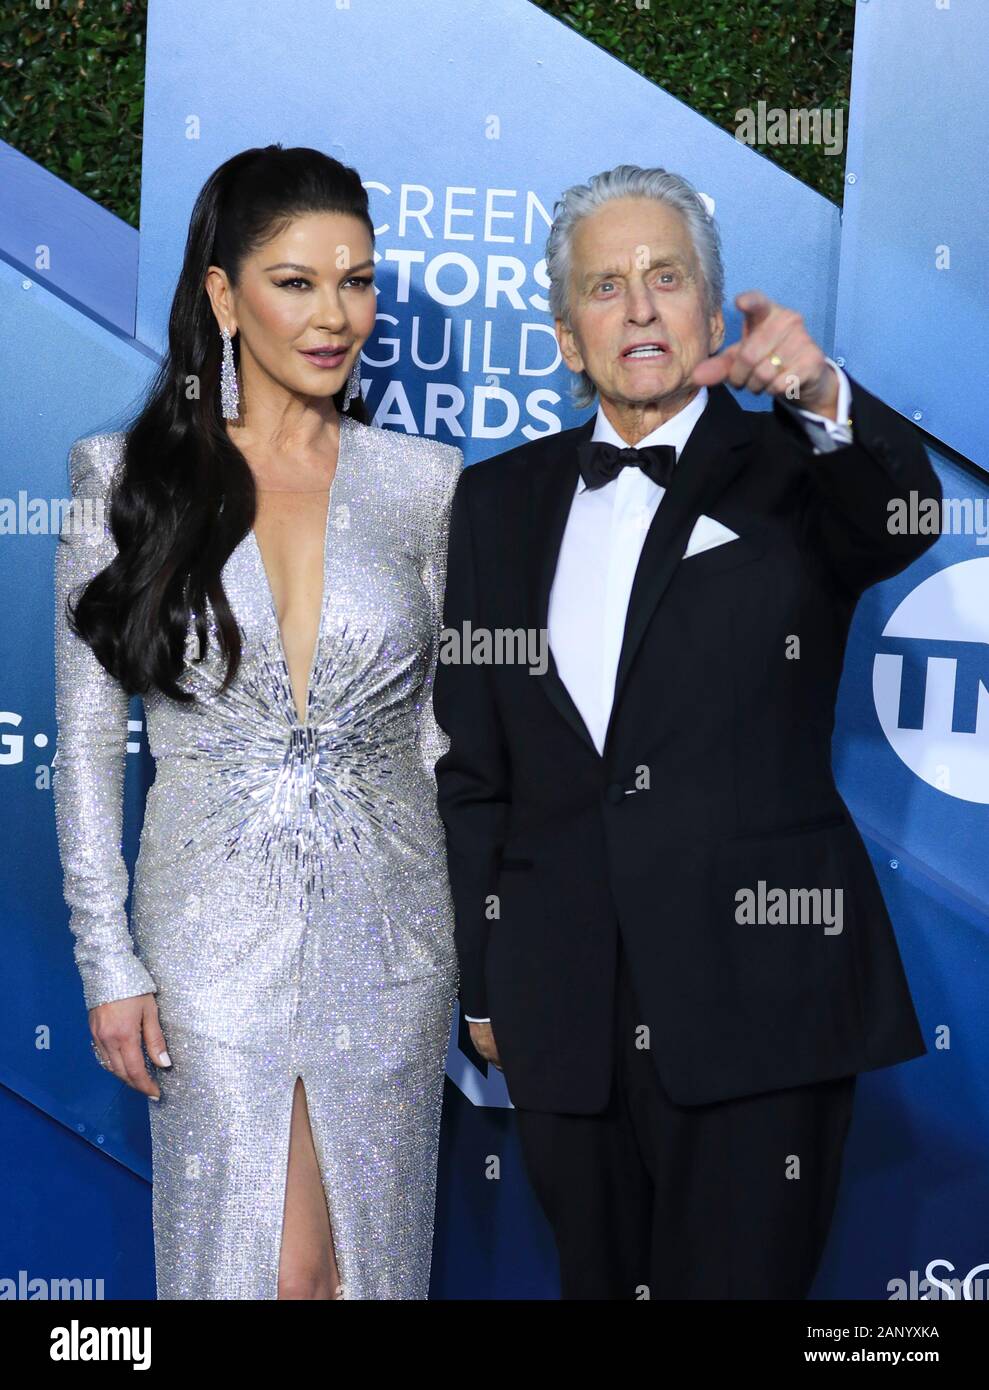 (200120) -- LOS ANGELES, Jan. 20, 2020 (Xinhua) -- Actor Michael Douglas and actress Catherine Zeta-Jones attend the 26th Annual Screen Actors Guild (SAG) Awards held at the Shrine Auditorium in Los Angeles, the United States, Jan. 19, 2020. (Xinhua/Li Ying) Stock Photo